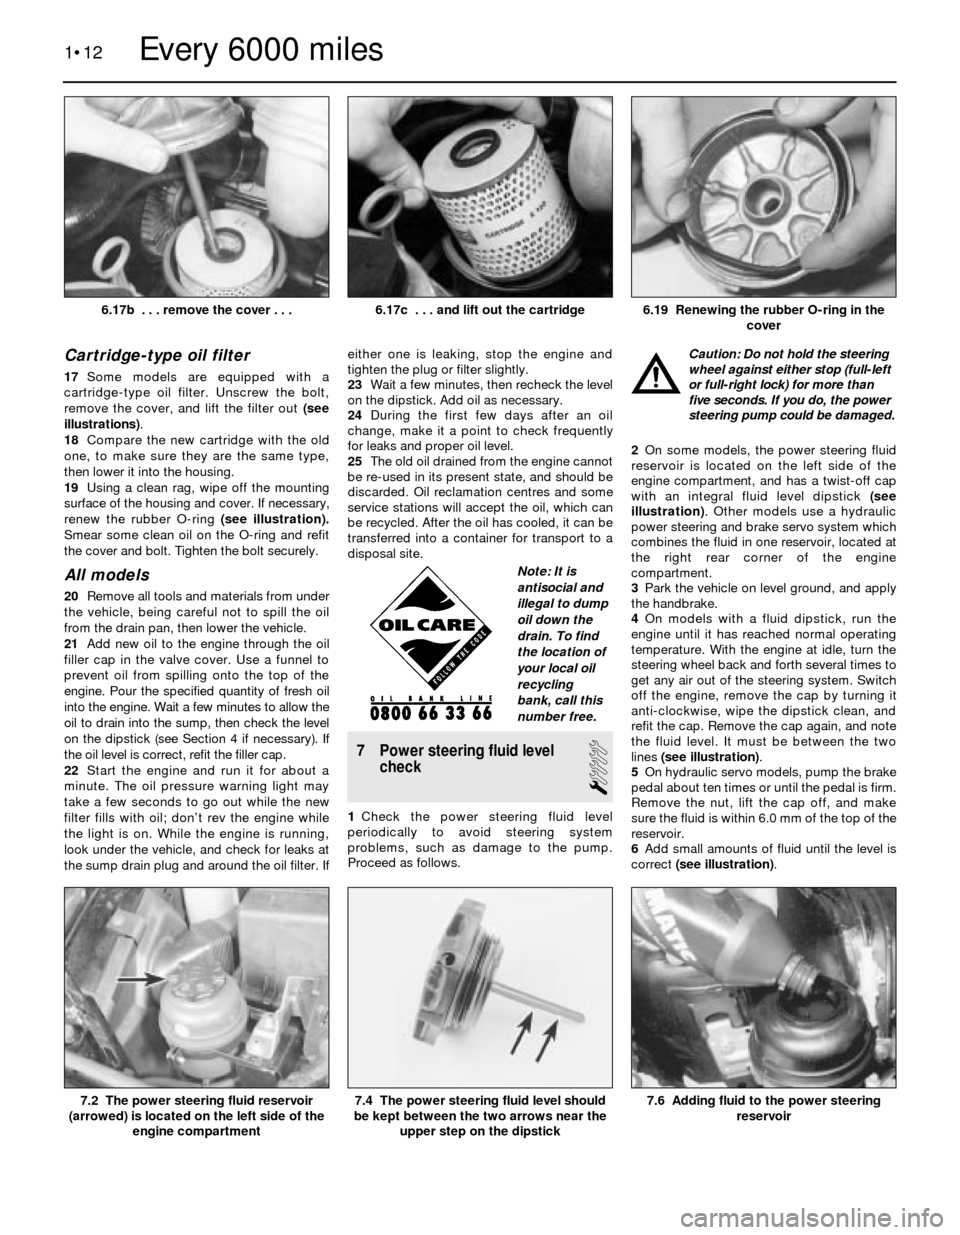 BMW 3 SERIES 1983 E30 Workshop Manual Cartridge-type oil filter
17Some models are equipped with a
cartridge-type oil filter. Unscrew the bolt,
remove the cover, and lift the filter out (see
illustrations).
18Compare the new cartridge with